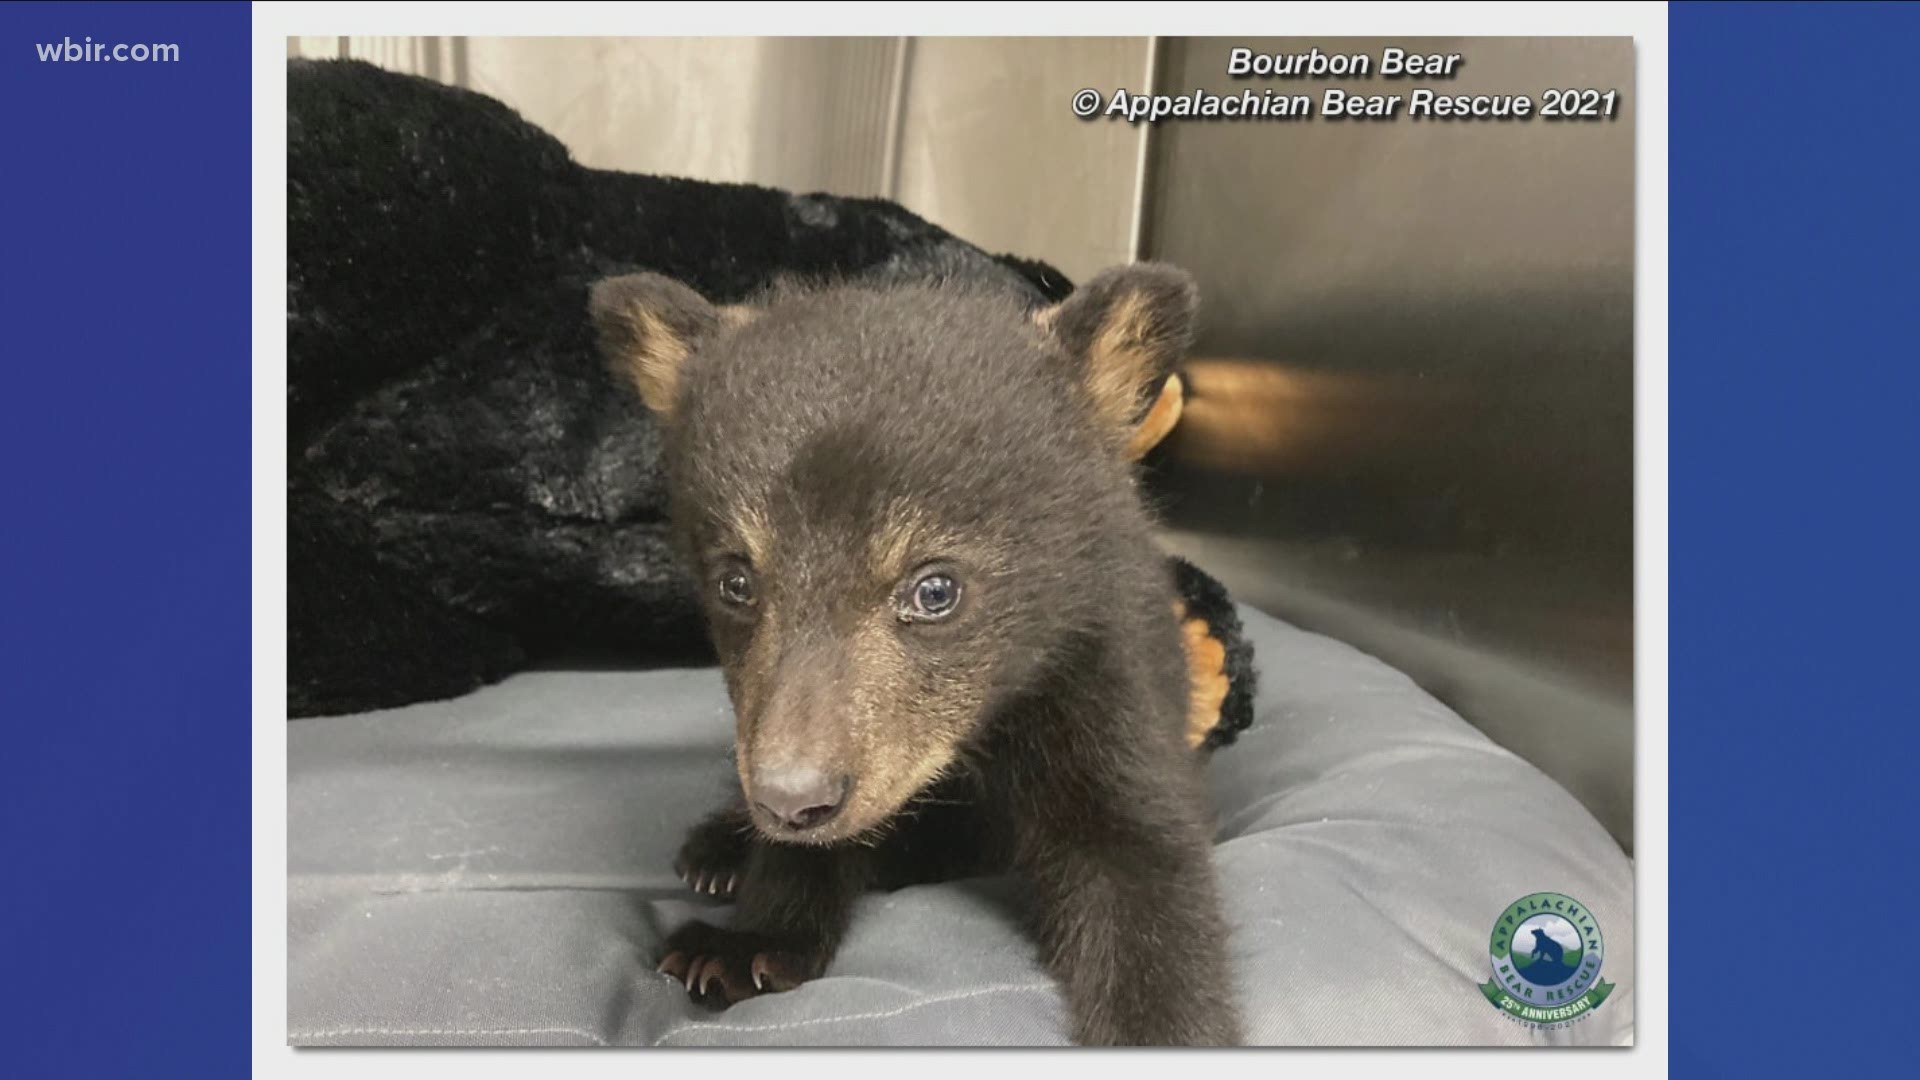 The 3-month-old cub was found in a remote area of southeast Kentucky. His name is Bourbon Bear.